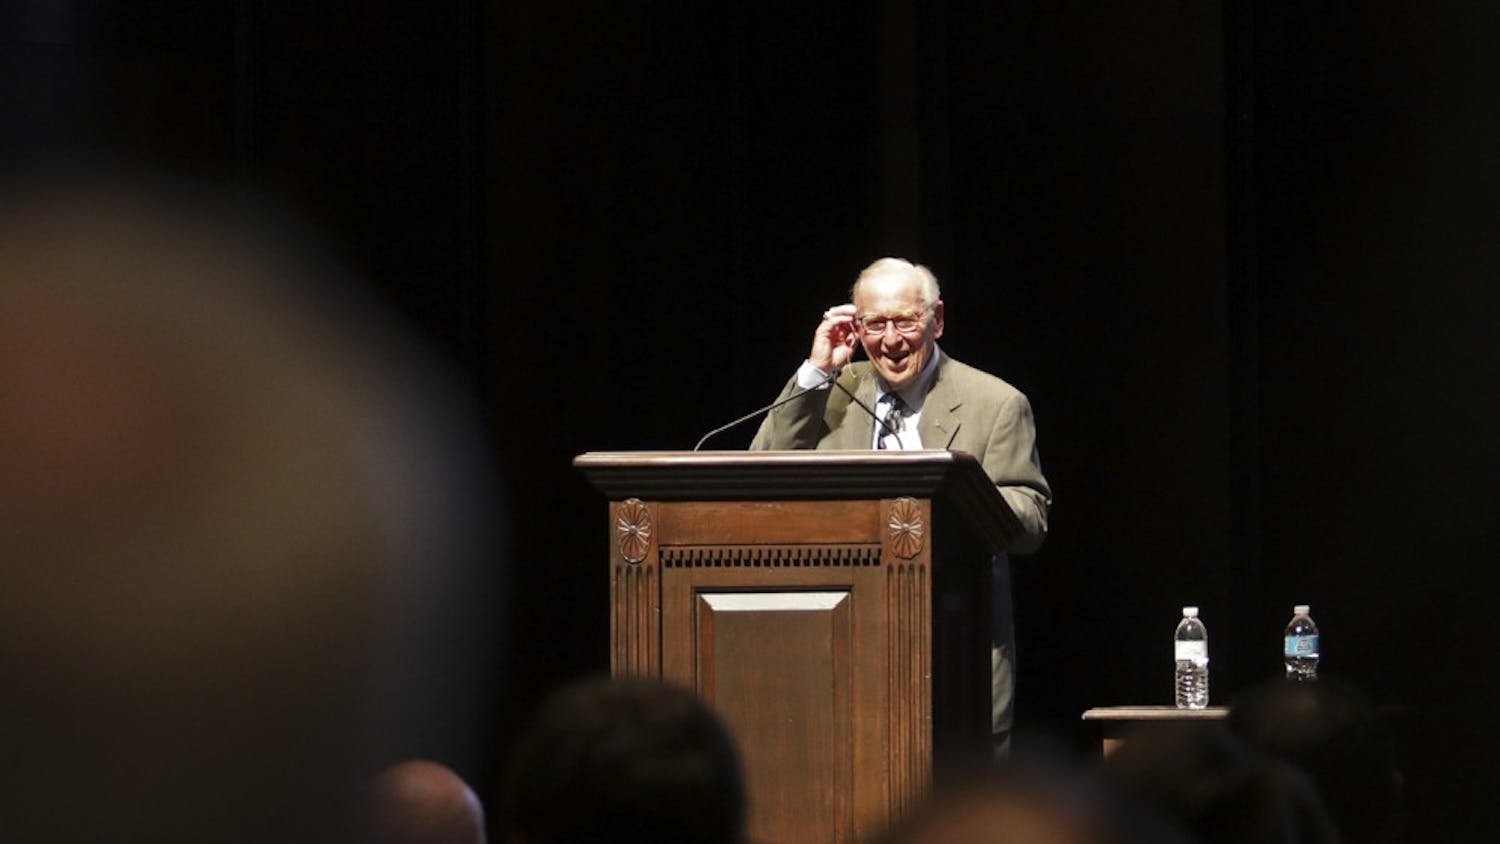 Astronaut Jim Lovell received a standing ovation at the beginning of his speech in Memorial Hall on Thursday night.